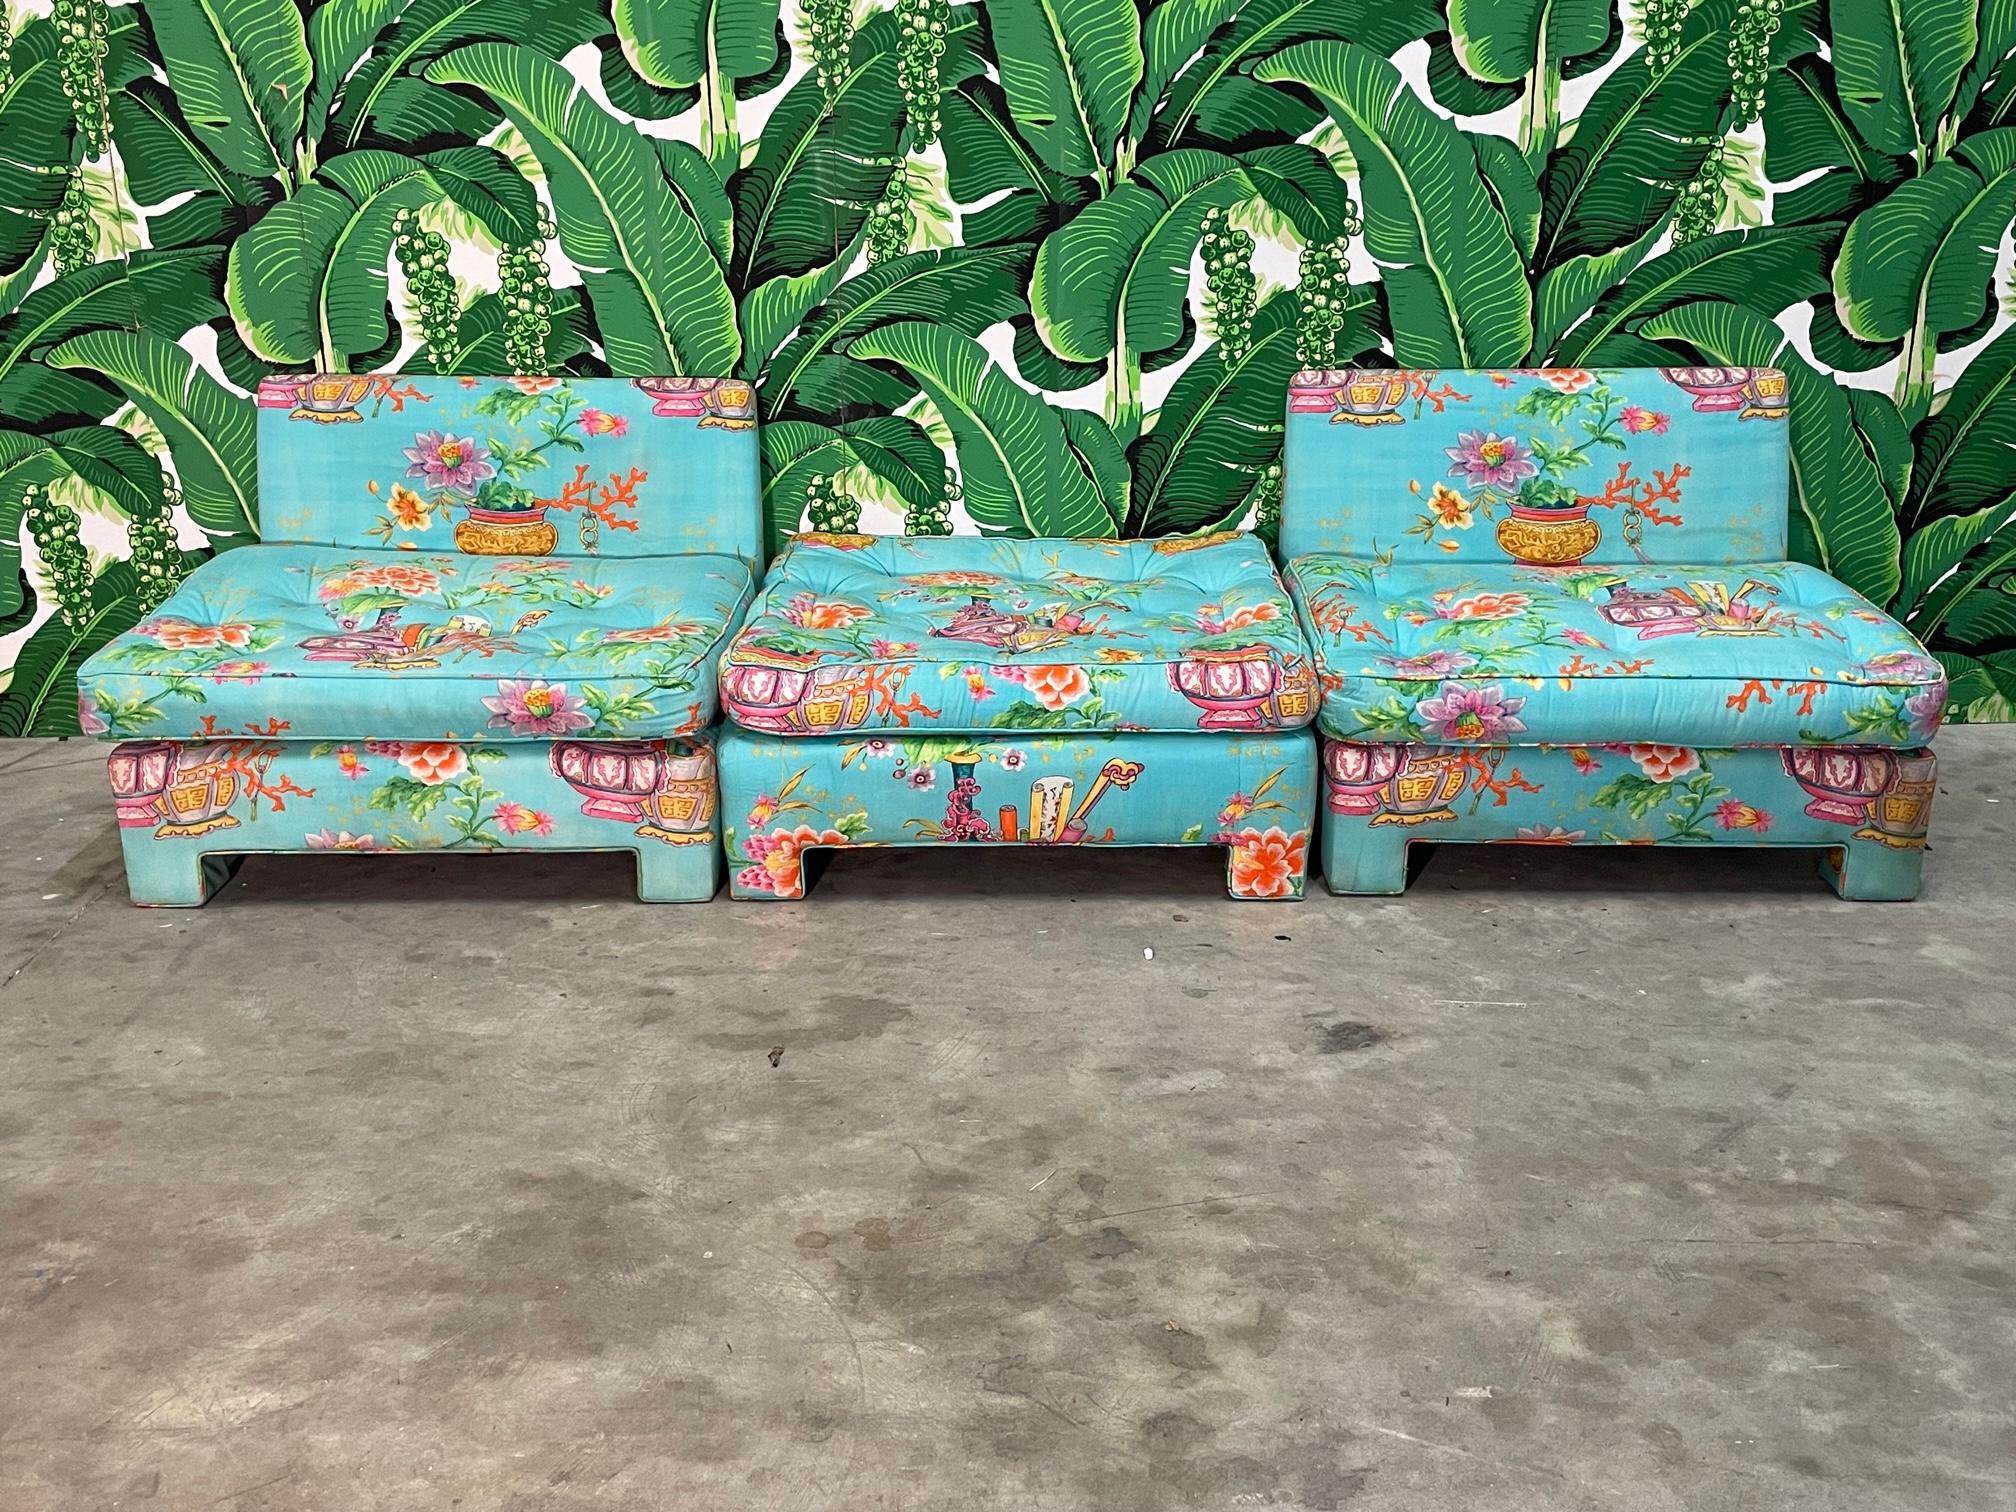 Chair and ottoman set by Milo Baughman for Thayer Coggin features two chairs and a single ottoman fully upholstered in a colorful, chinoiserie style print. This modular sectional set can be configured in several ways. Good condition with